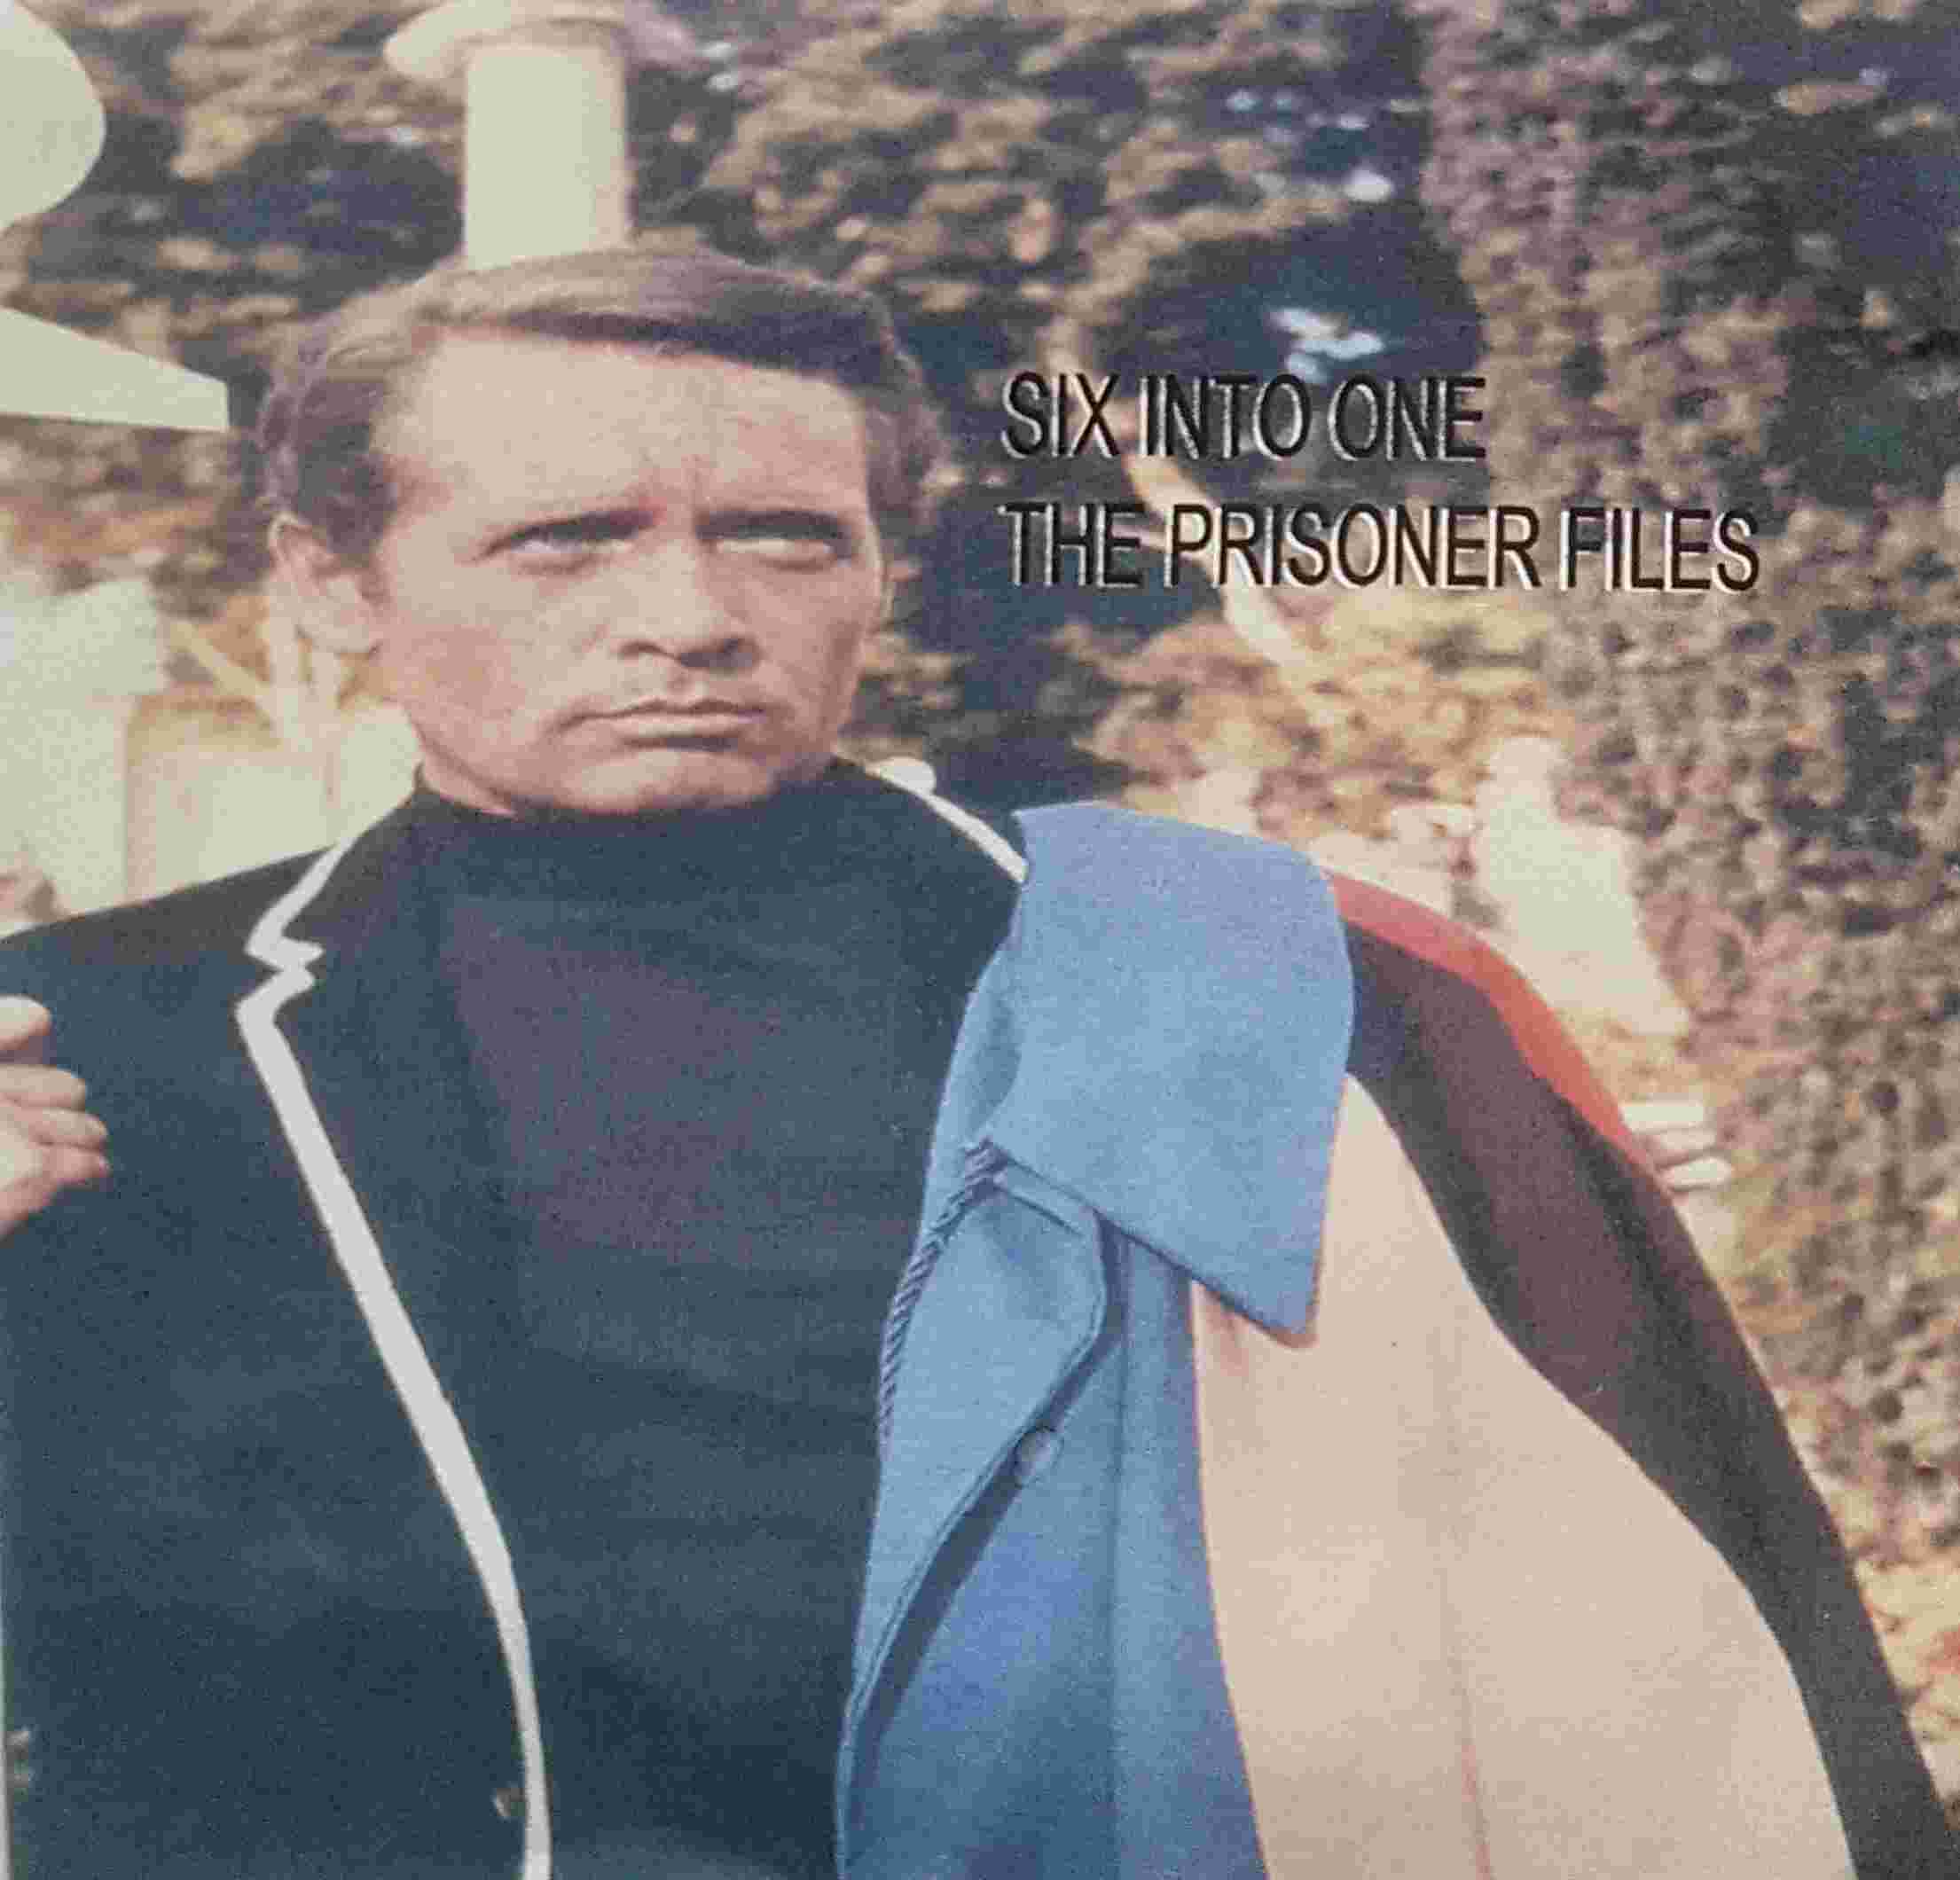 Picture of DVD-SIO-TPF Six into one - The Prisoner files by artist Laurens C. Postma / Chris Rodley from ITV, Channel 4 and Channel 5 library